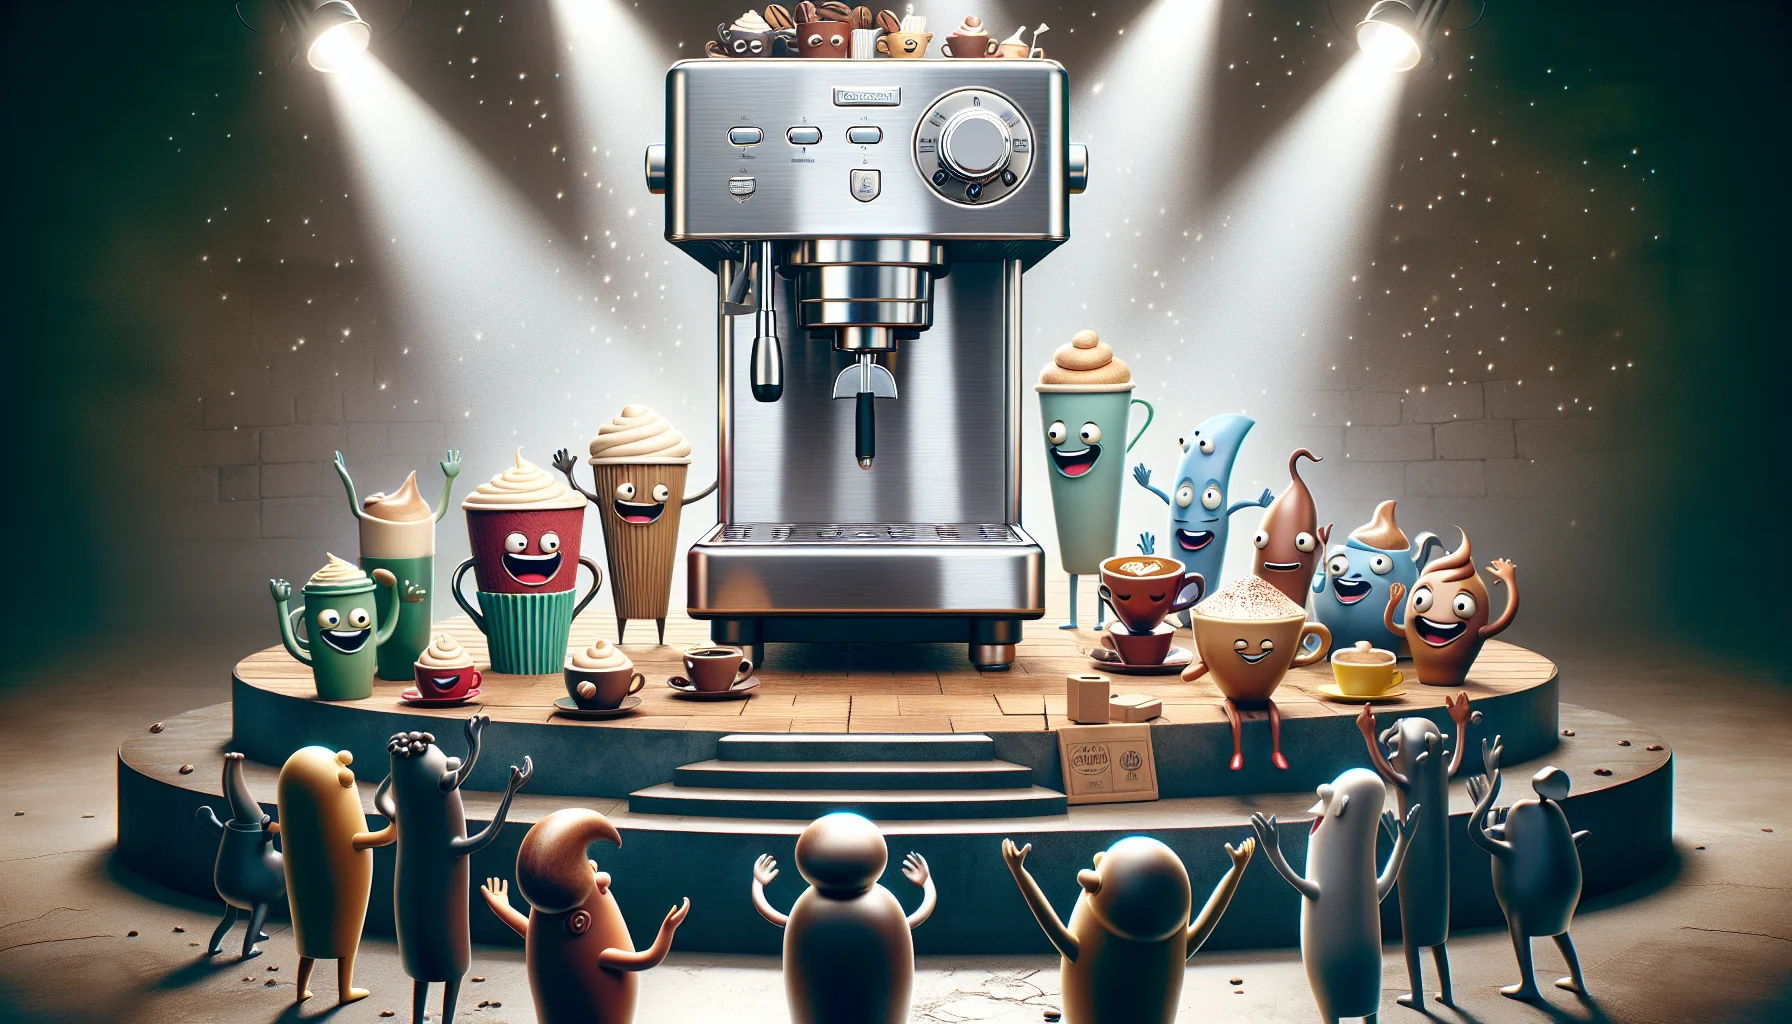 Create a whimsical and humorous image of a stainless steel Cuisinart espresso machine in an unconventional coffee shop ambience. The machine is heroically standing atop of a stage with spotlights dramatically illuminating it. Around it, cartoonish characters representing different types of coffee such as lattes, mochas, cappuccinos, and macchiatos, are applauding and cheering with sheer delight. Some characters can be seen gleefully waiting in line, patient in their desire to be brewed by the machine. The atmosphere is lively, full of laughter, as if inviting human customers into this animated world of coffee.